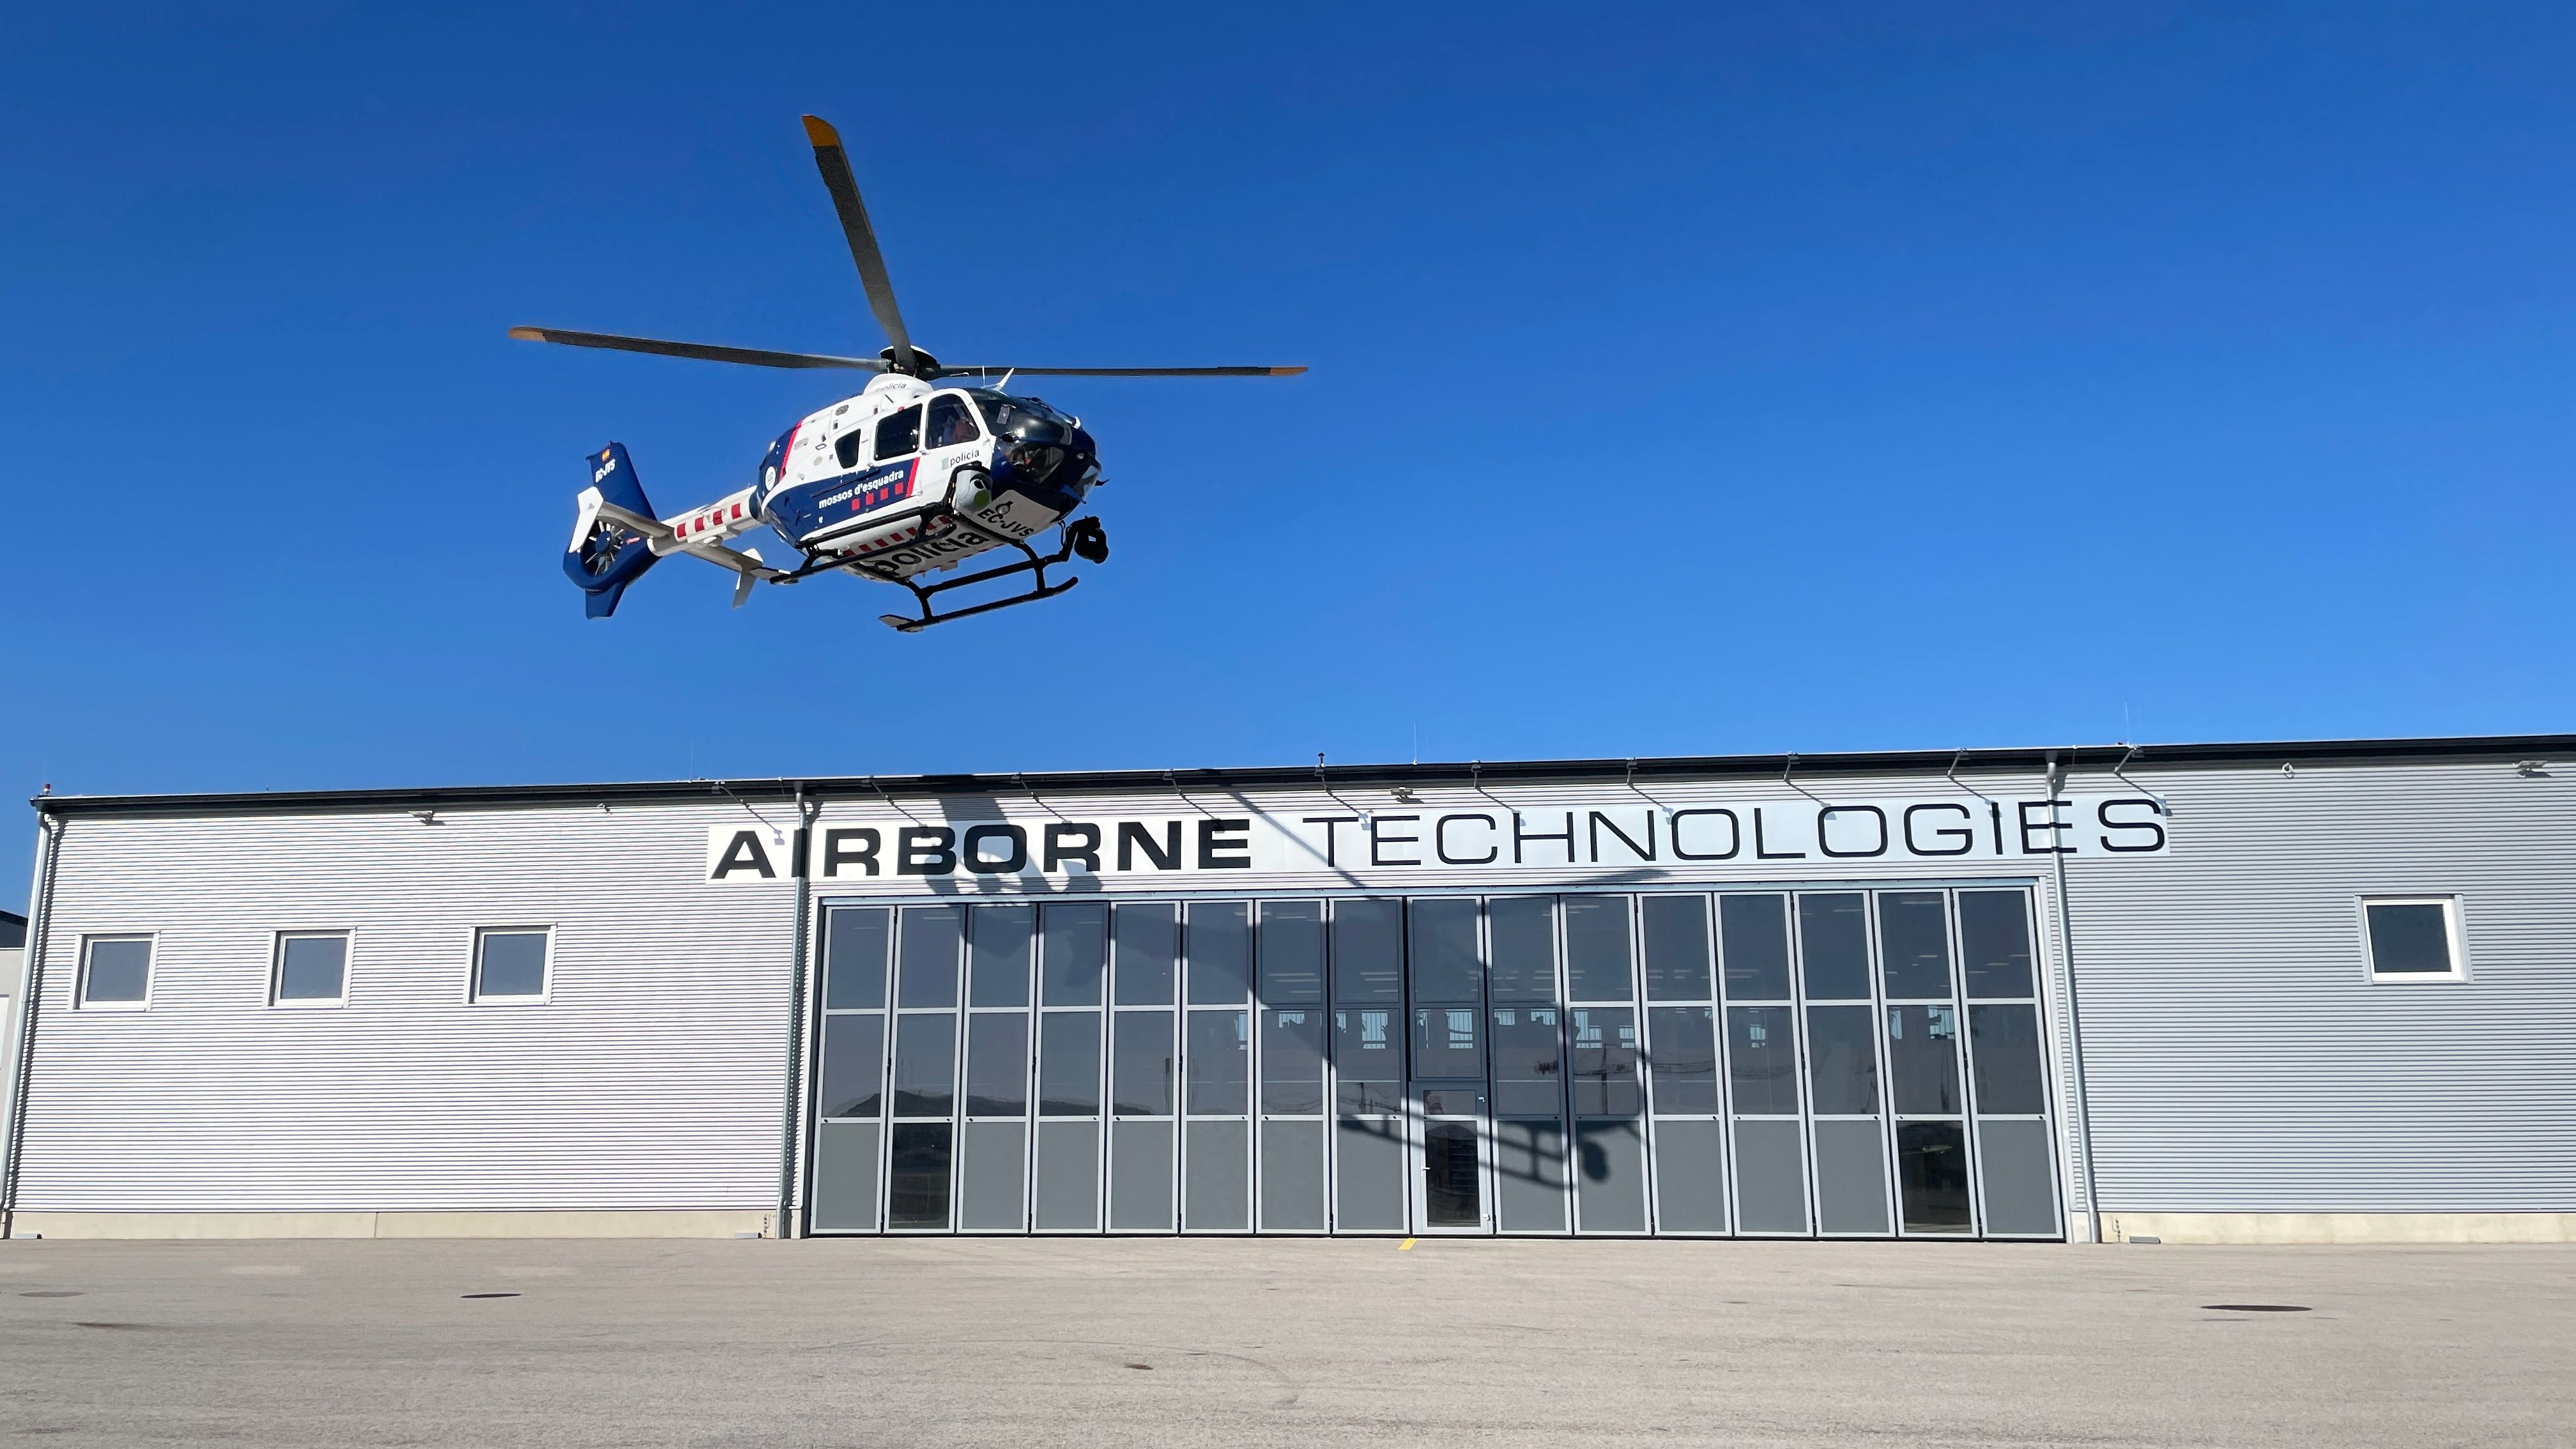 H135 – Eliance for Catalonian Police - hpgrade of Airbus engine & Airborne system